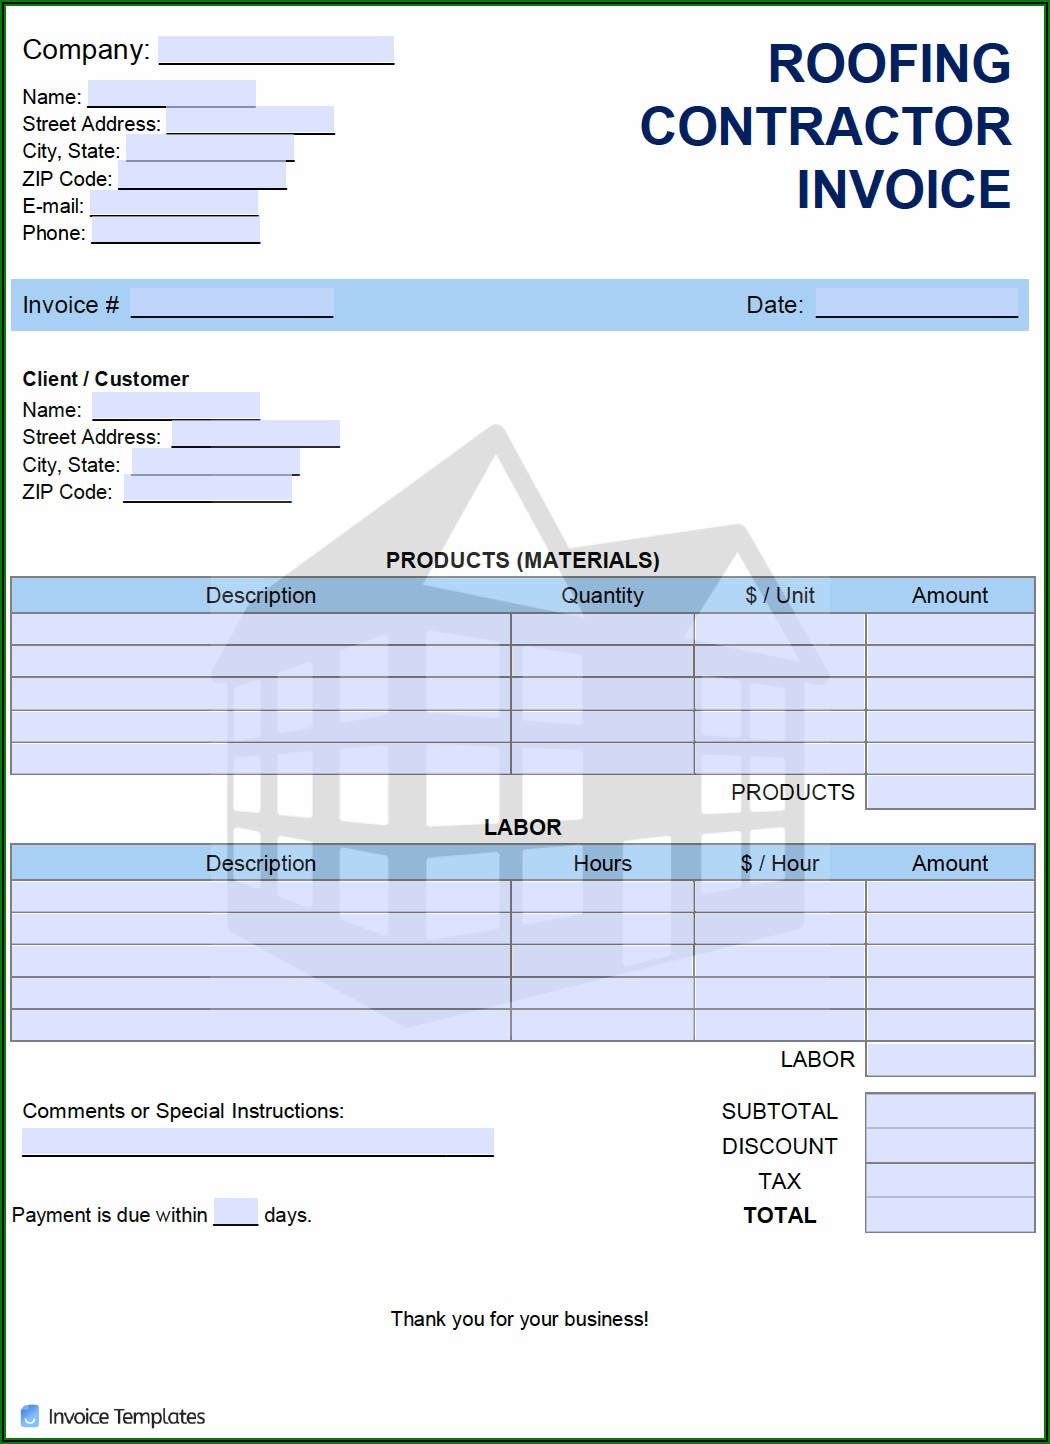 Roofing Invoice Sample Template 2 Resume Examples goVLdmZNVv